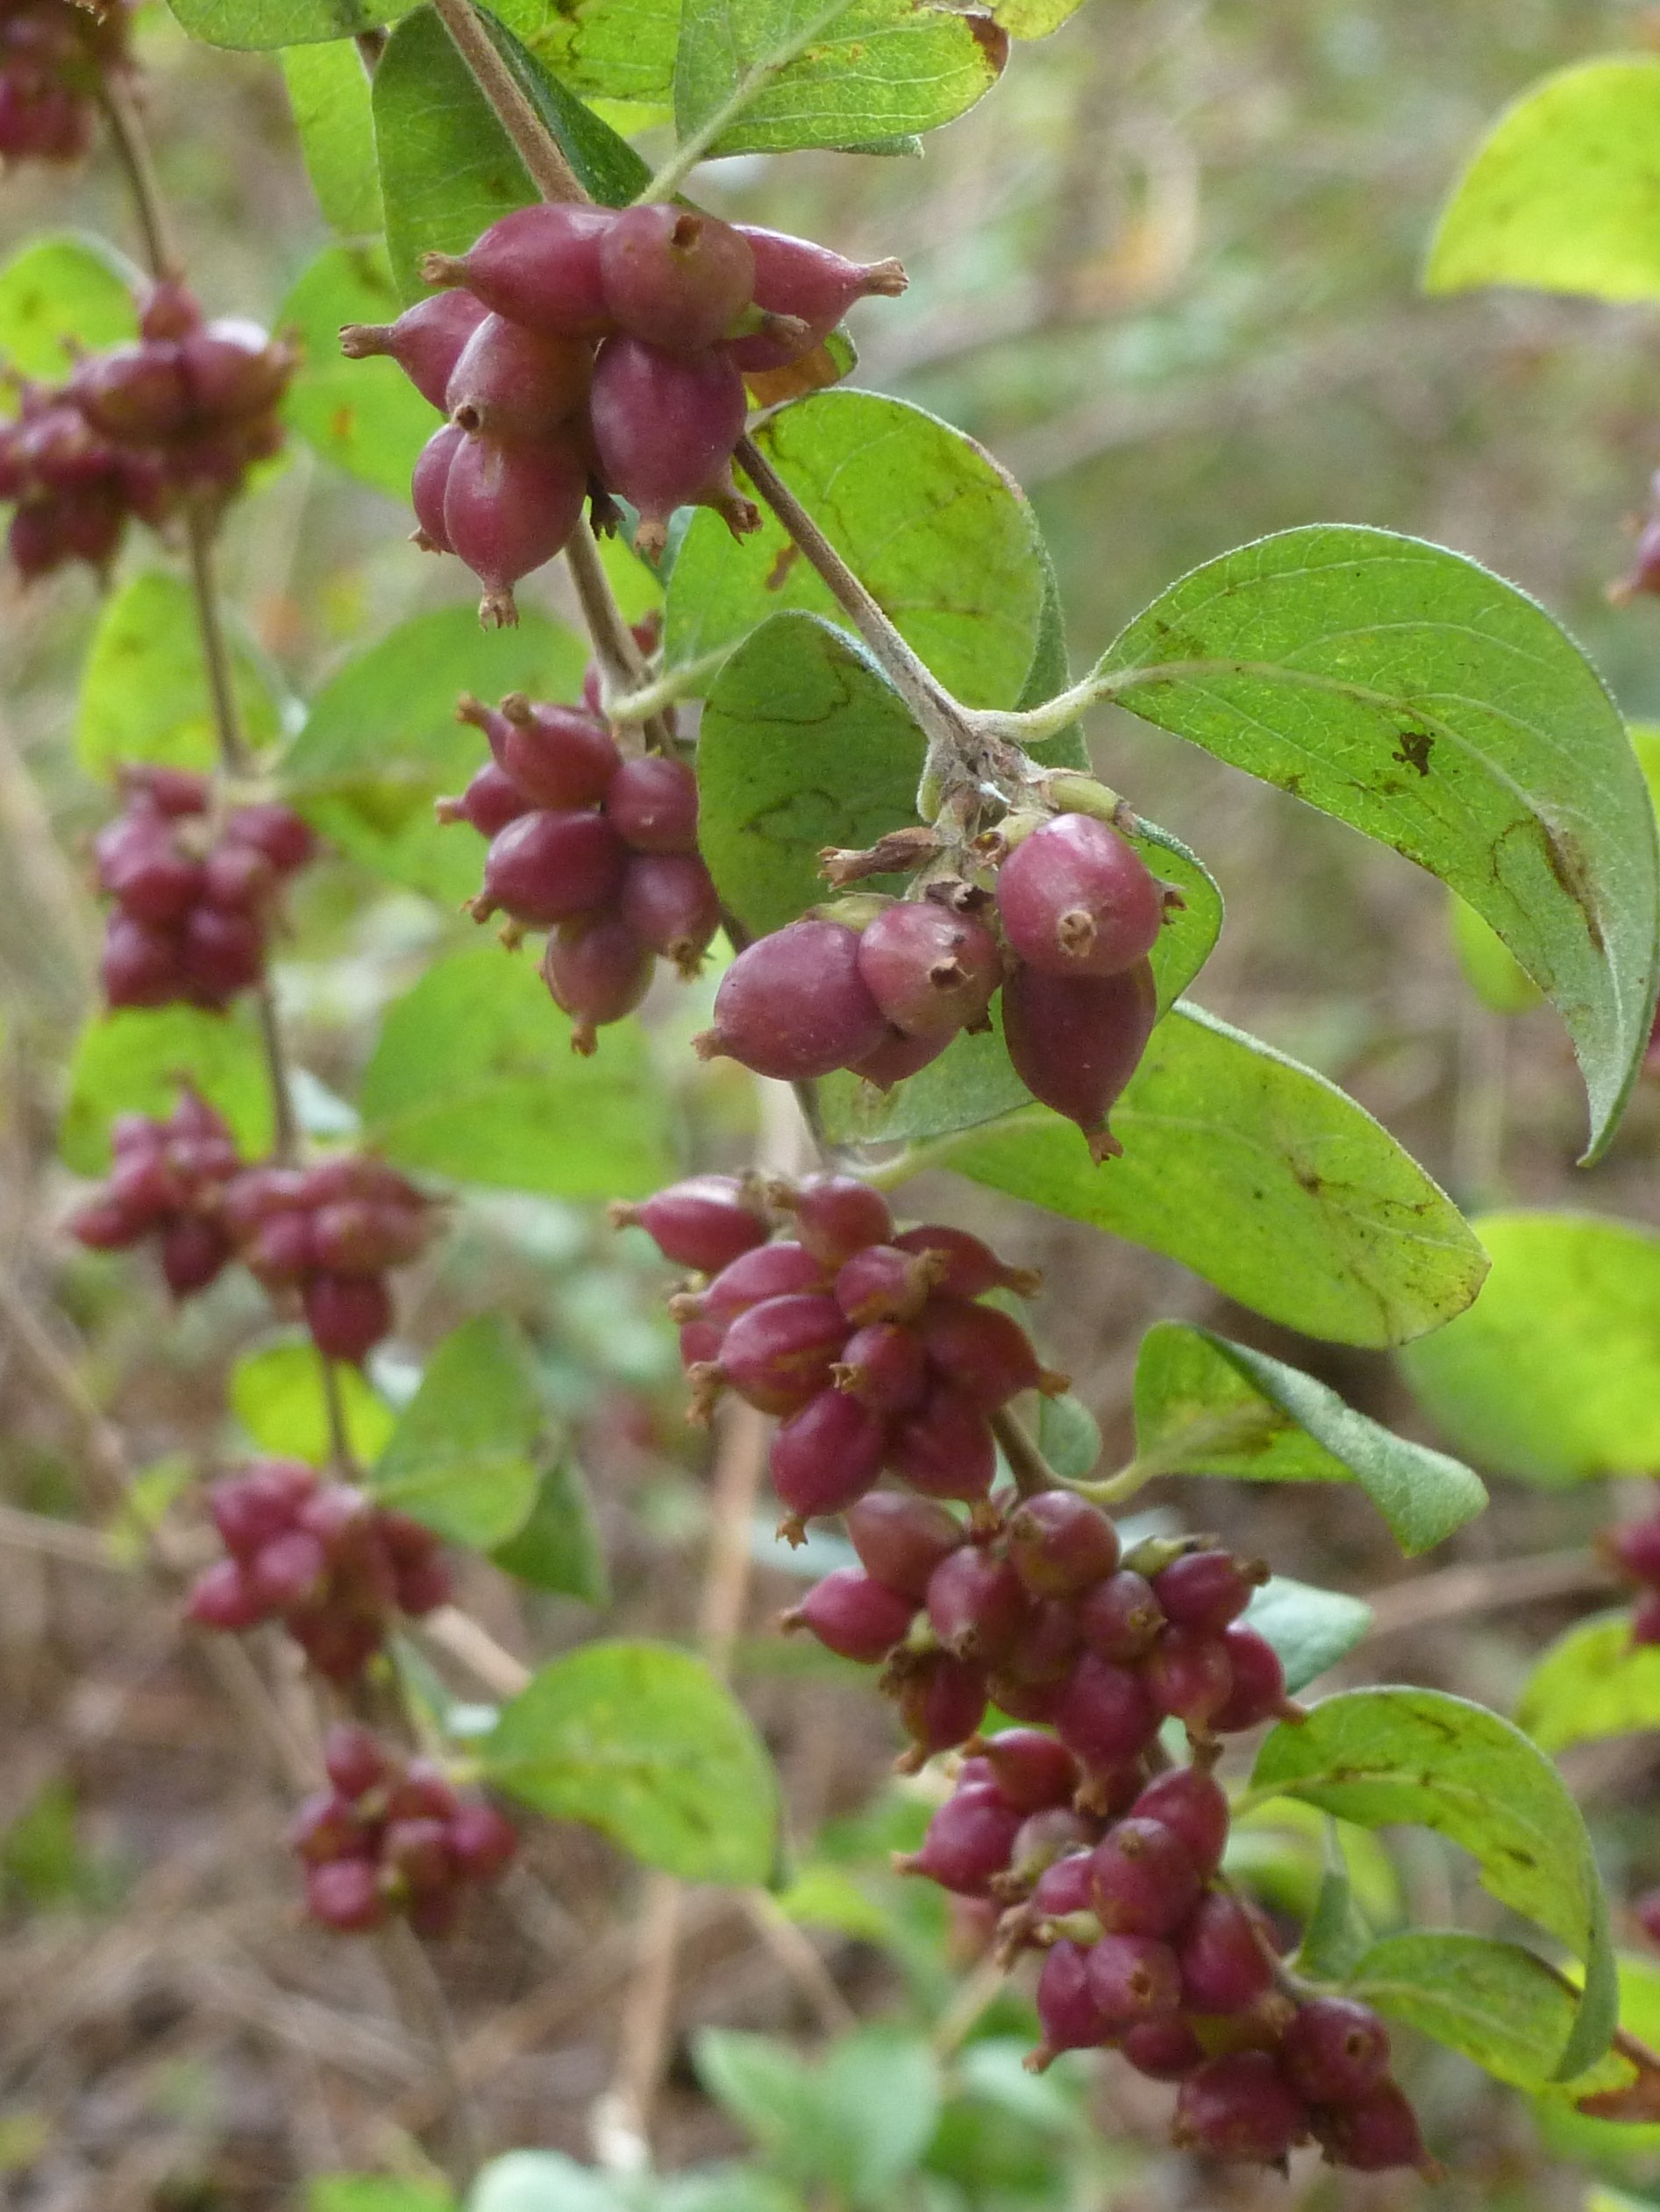 The Scientific Name is Symphoricarpos orbiculatus. You will likely hear them called Coralberry, Buckbrush, Indian Currant, Red Snowberry. This picture shows the Tight clusters of brightly colored berries are produced in the fall and can remain on the stems into winter. of Symphoricarpos orbiculatus